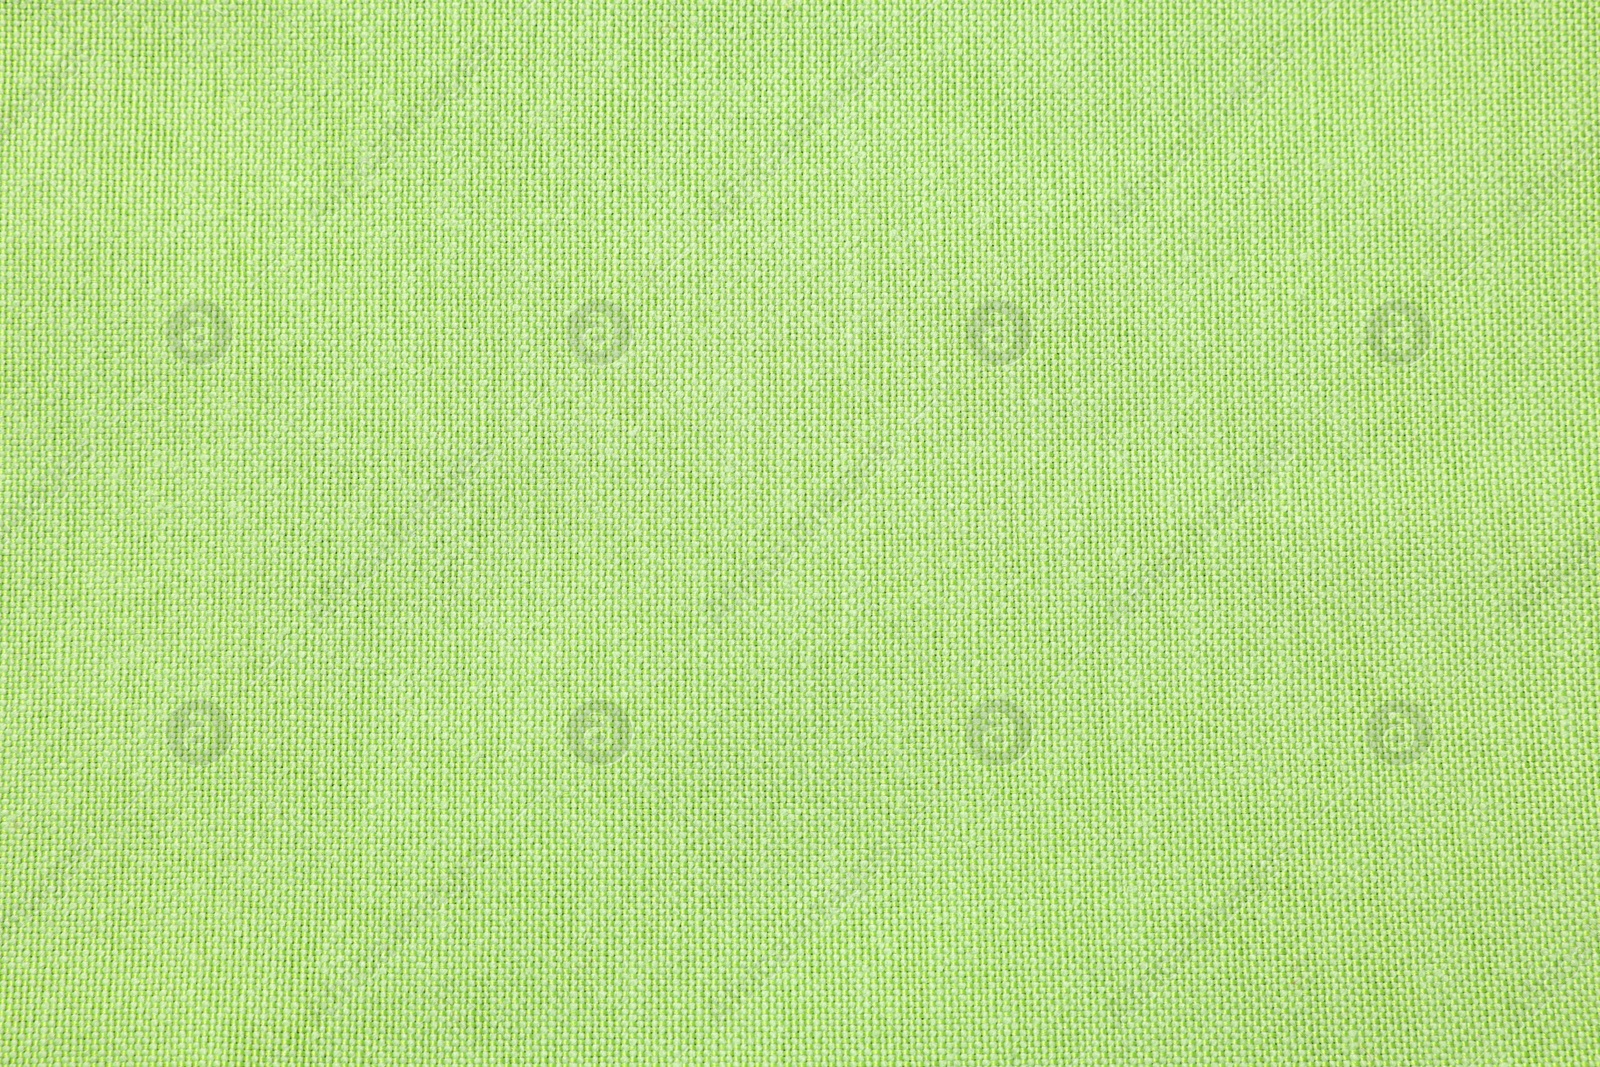 Photo of Texture of light green fabric as background, top view